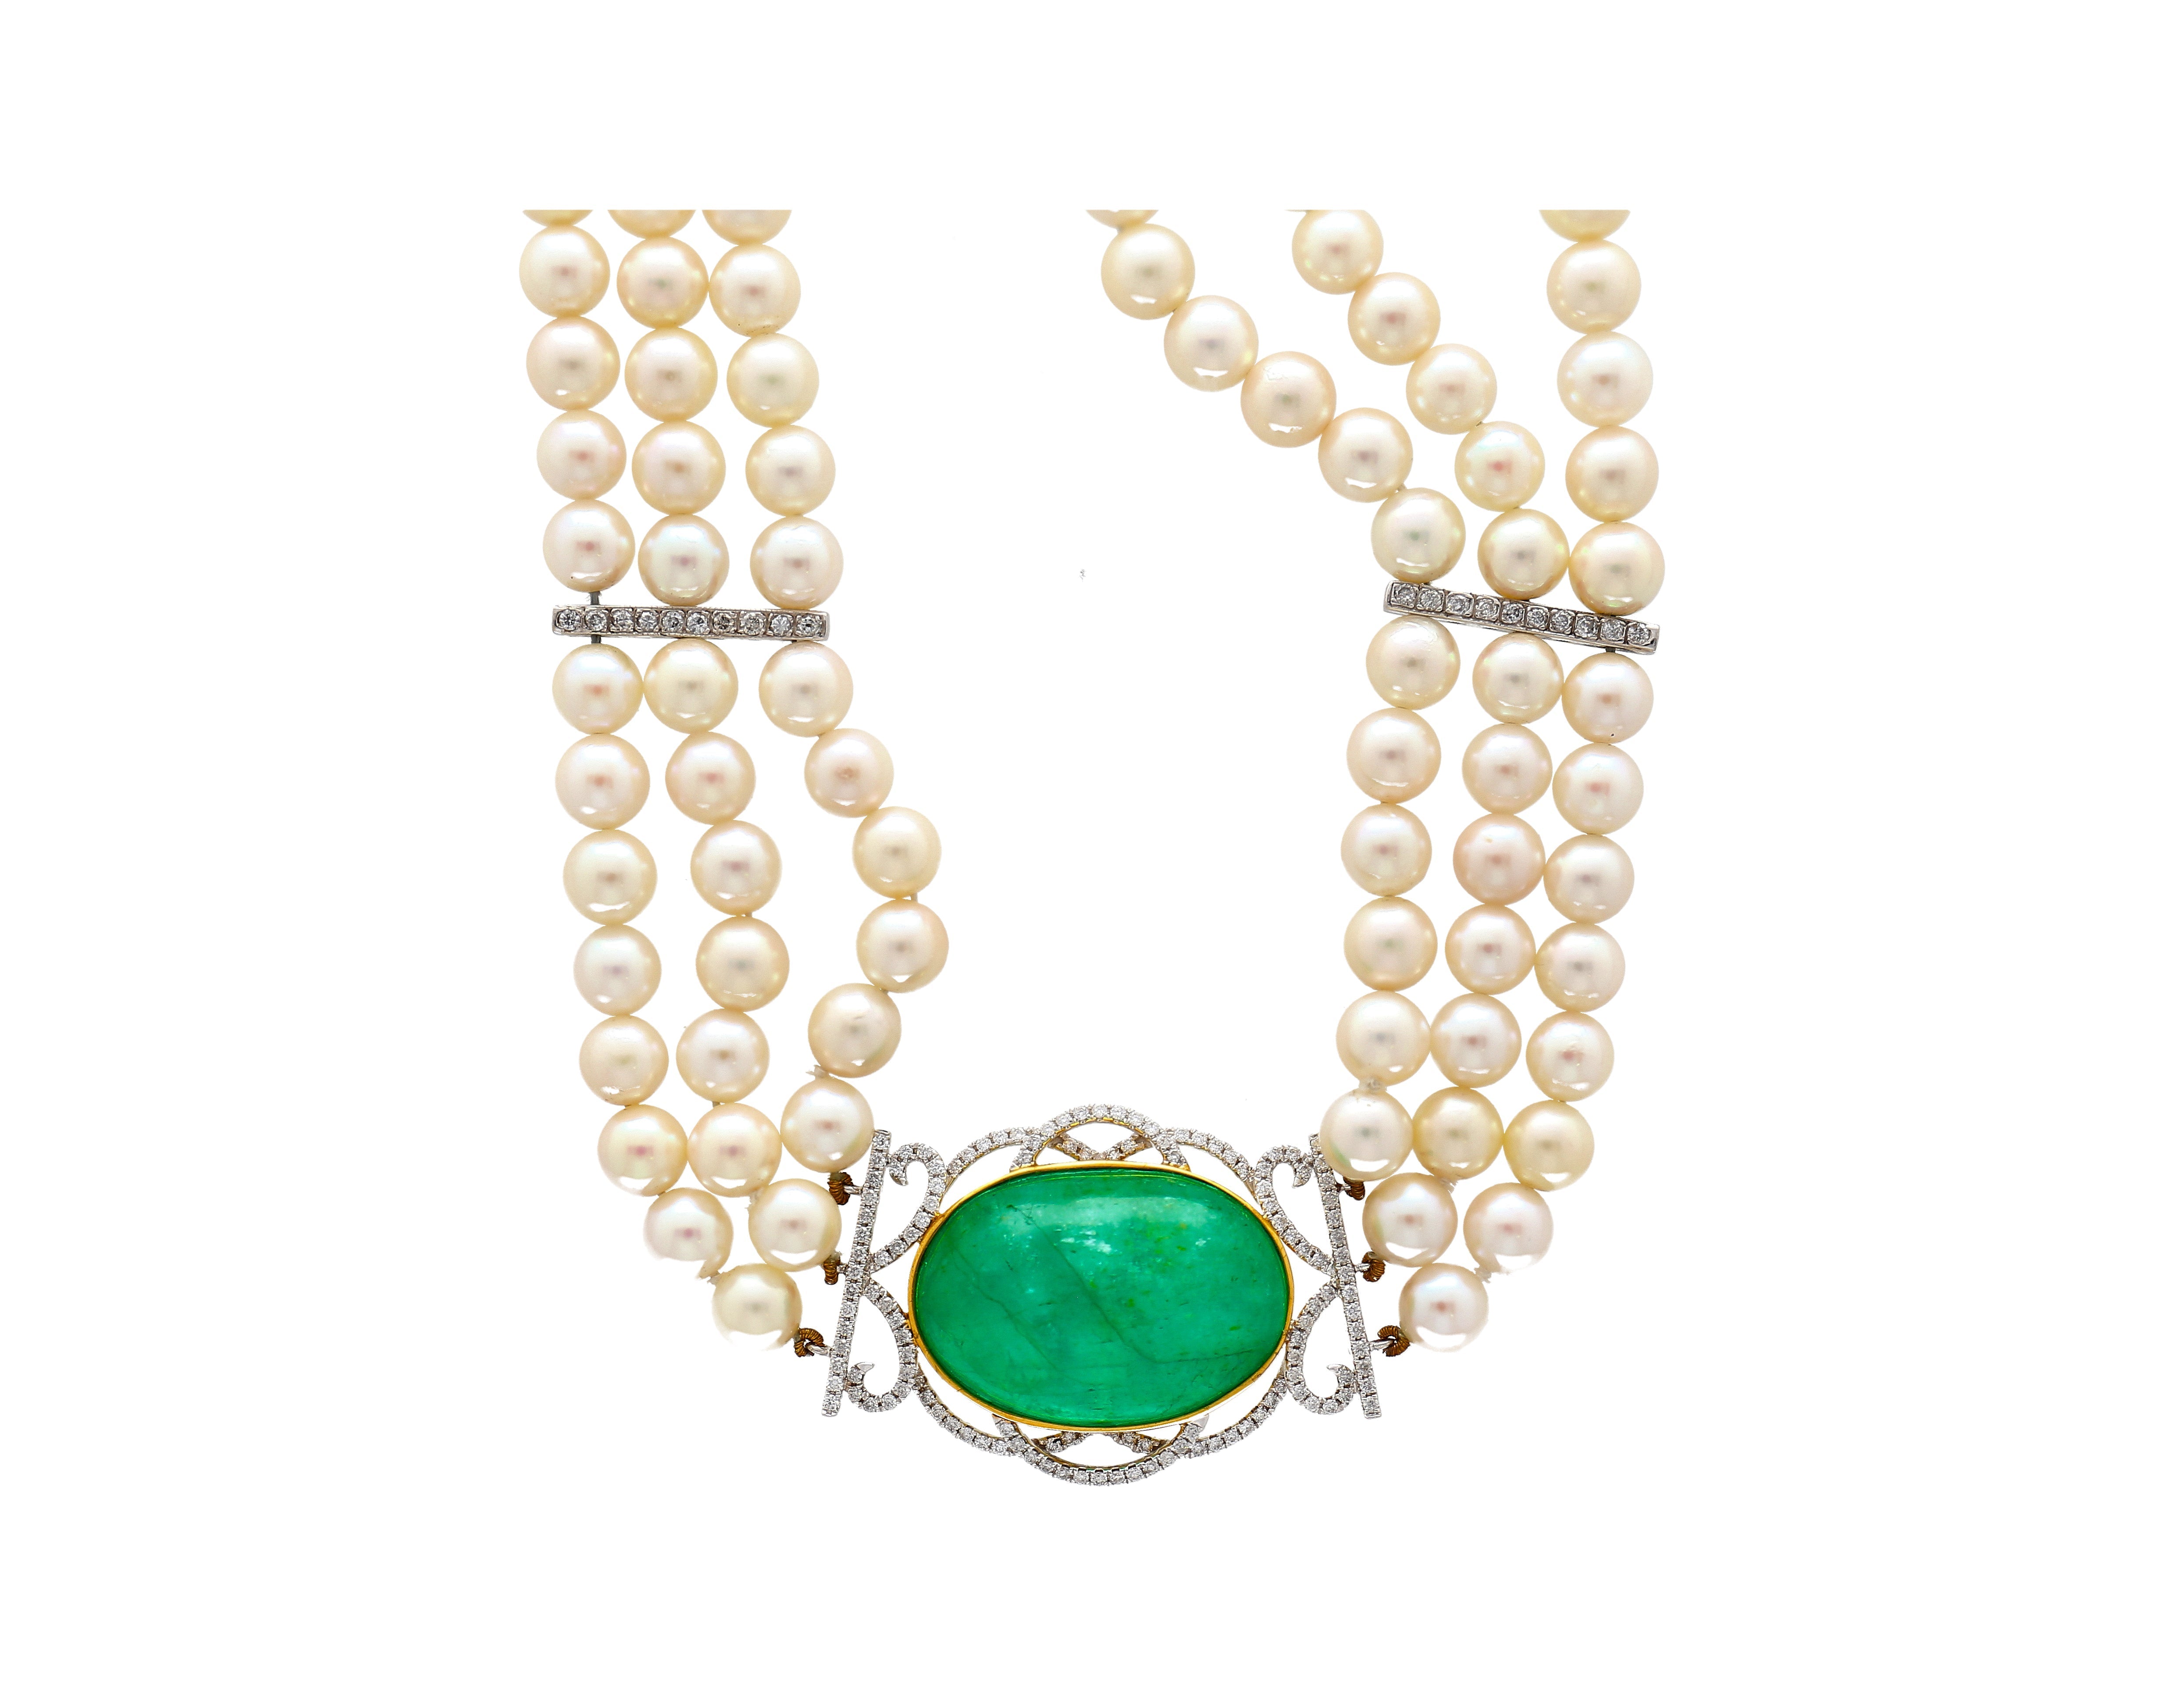 Vintage-Victorian-Style-Cabochon-Emerald-And-3-Strand-Pearl-Choker-Necklace-Chokers.jpg